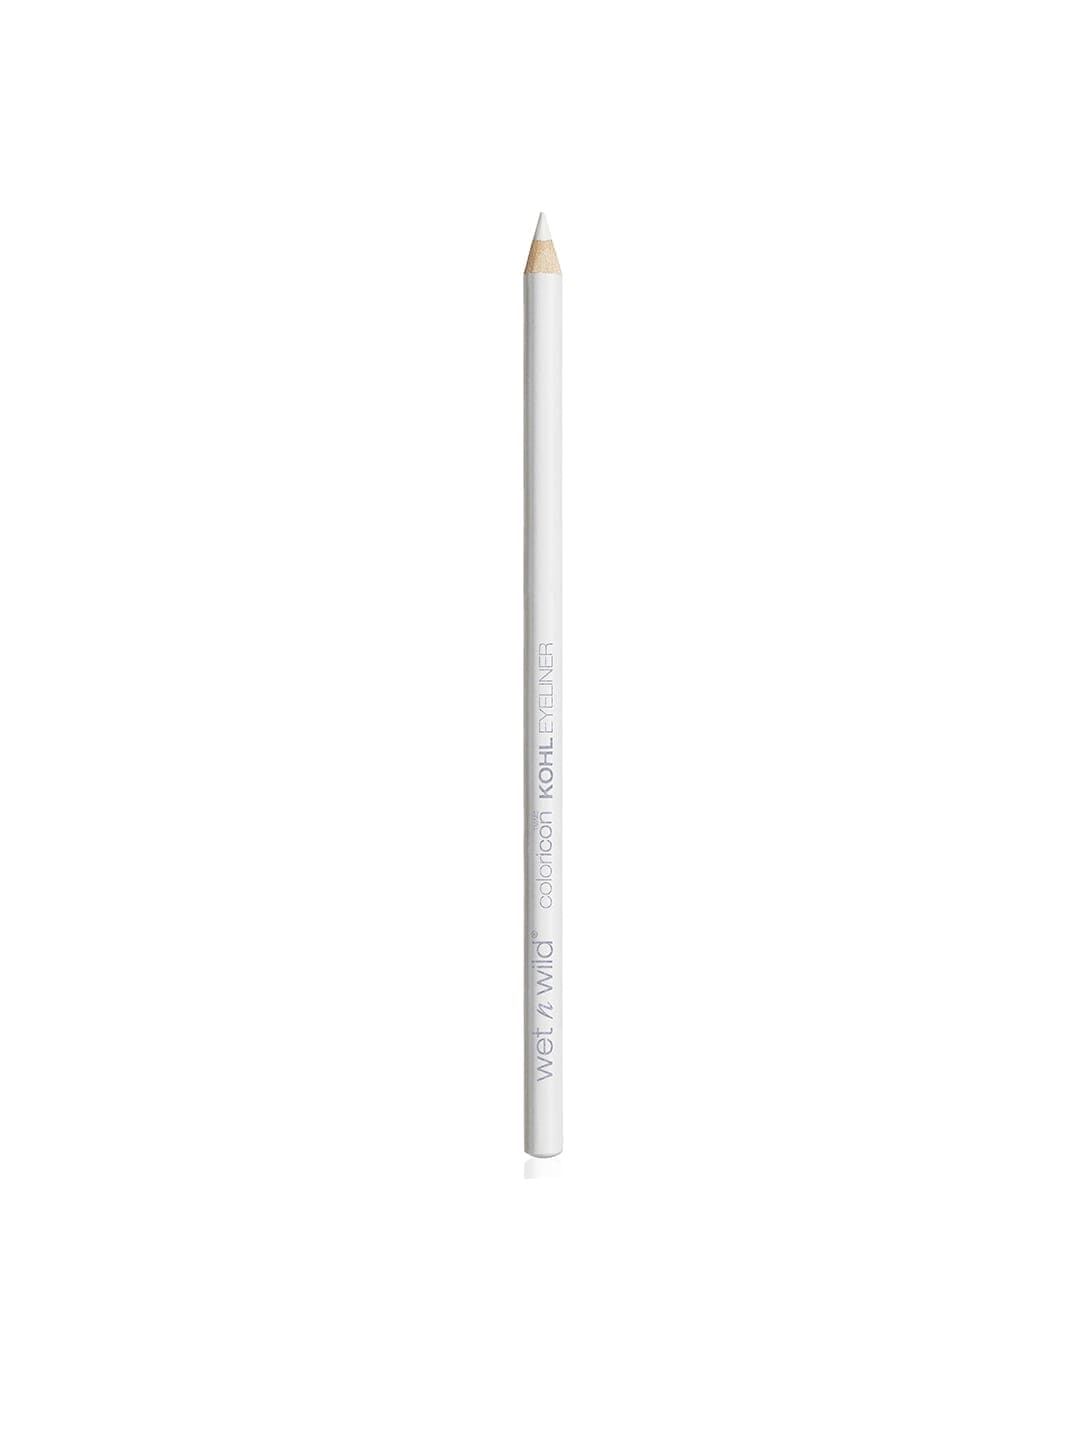 Wet n Wild Color Icon Kohl Liner Pencil - You're Always White E608A 1.4 g Price in India